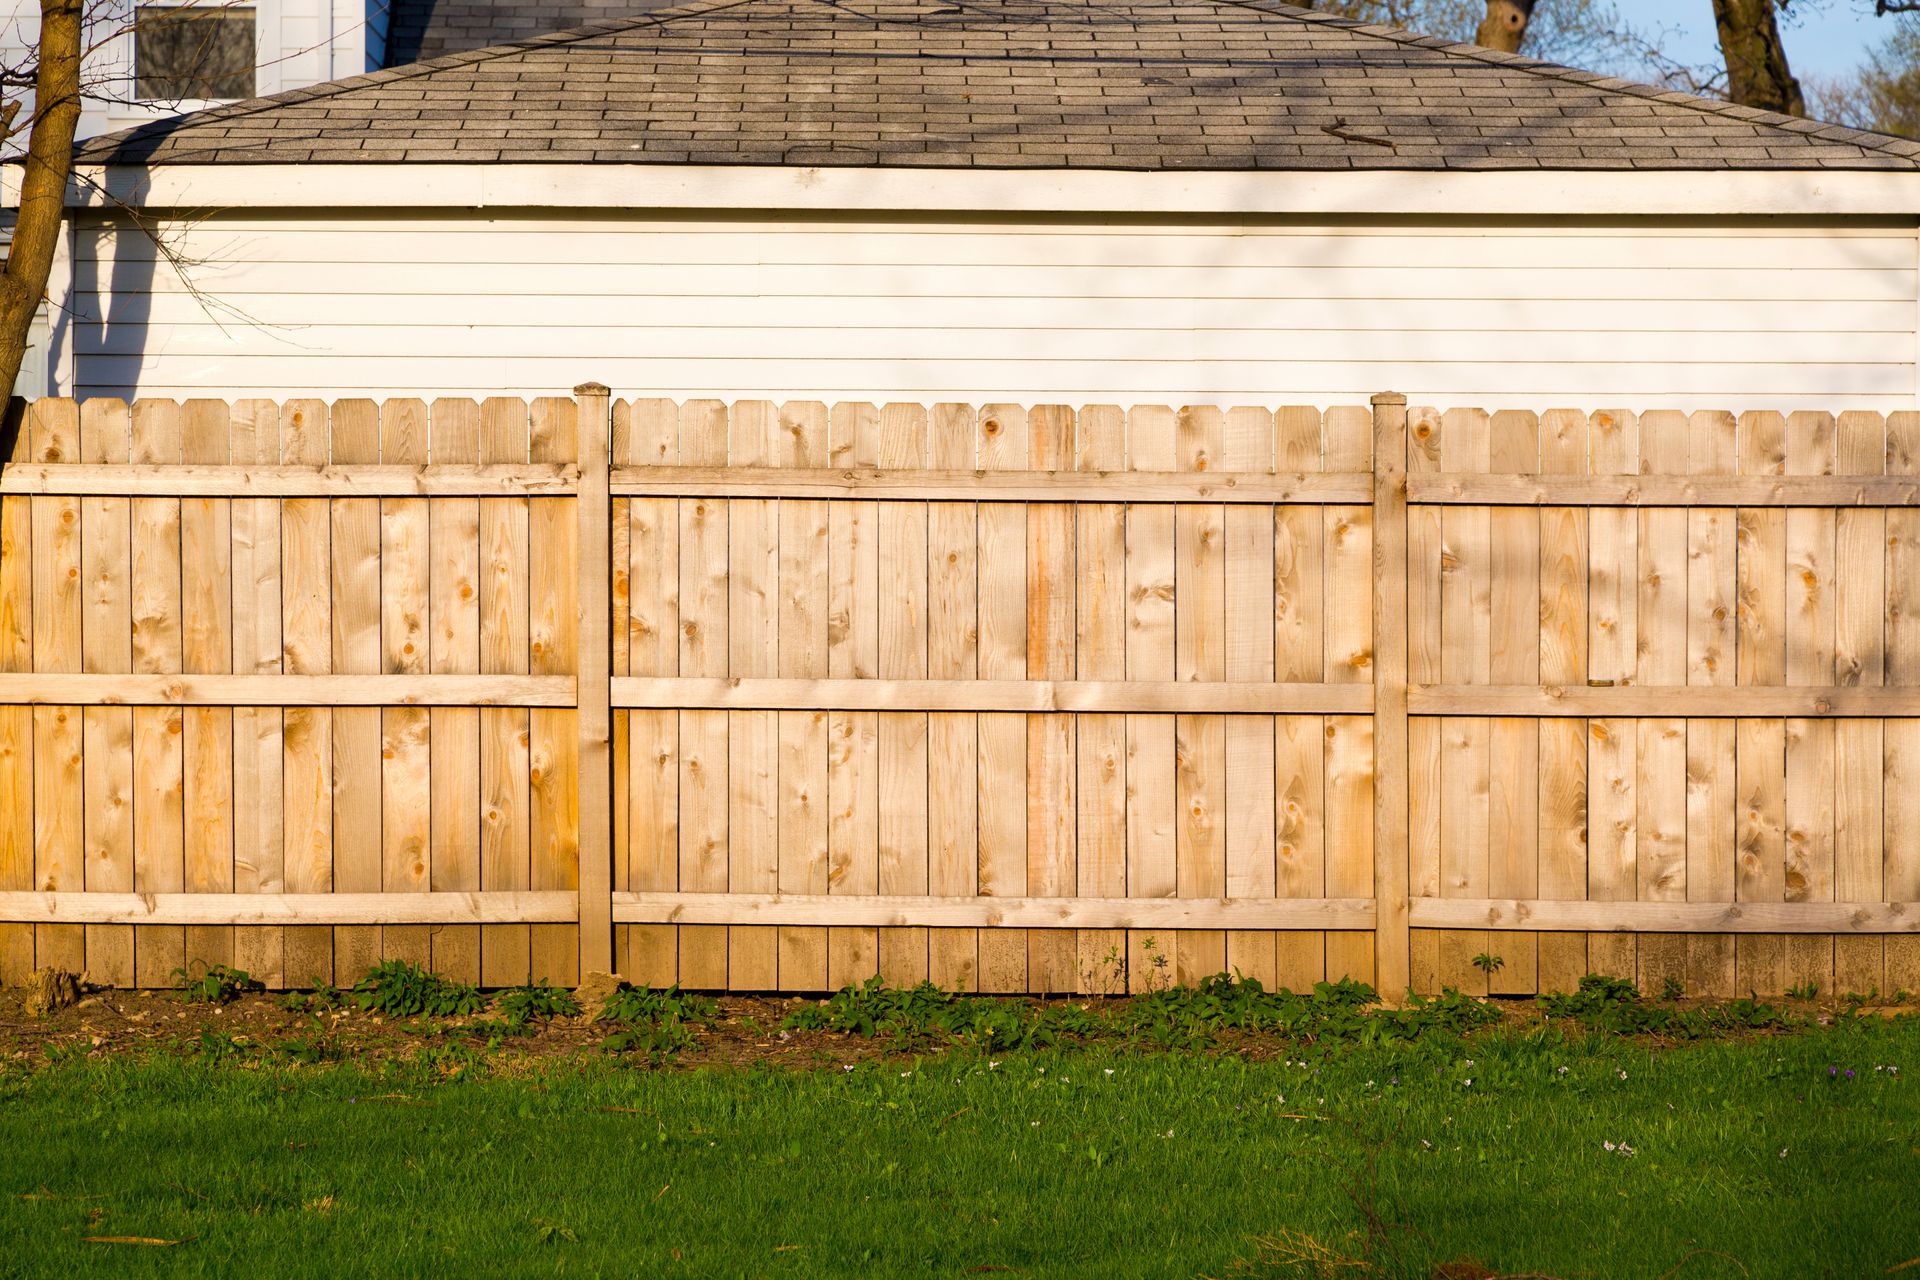 Rustic wooden fence, with weathered planks and visible grain patterns, enclosing a garden area.